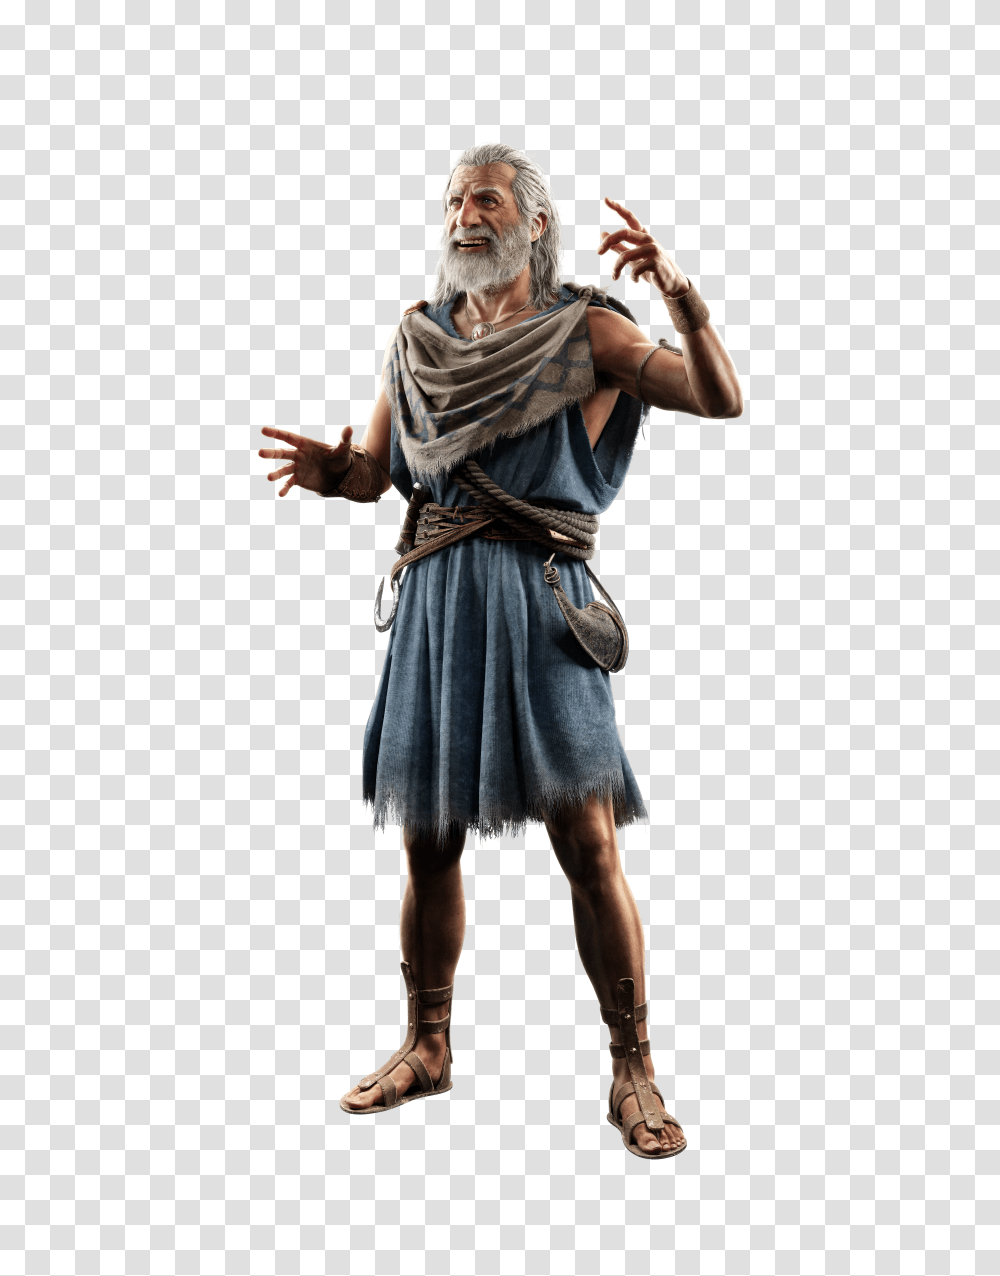 Assassins Creed Odyssey Debut Gameplay Trailer Rpg Site Transparent Png